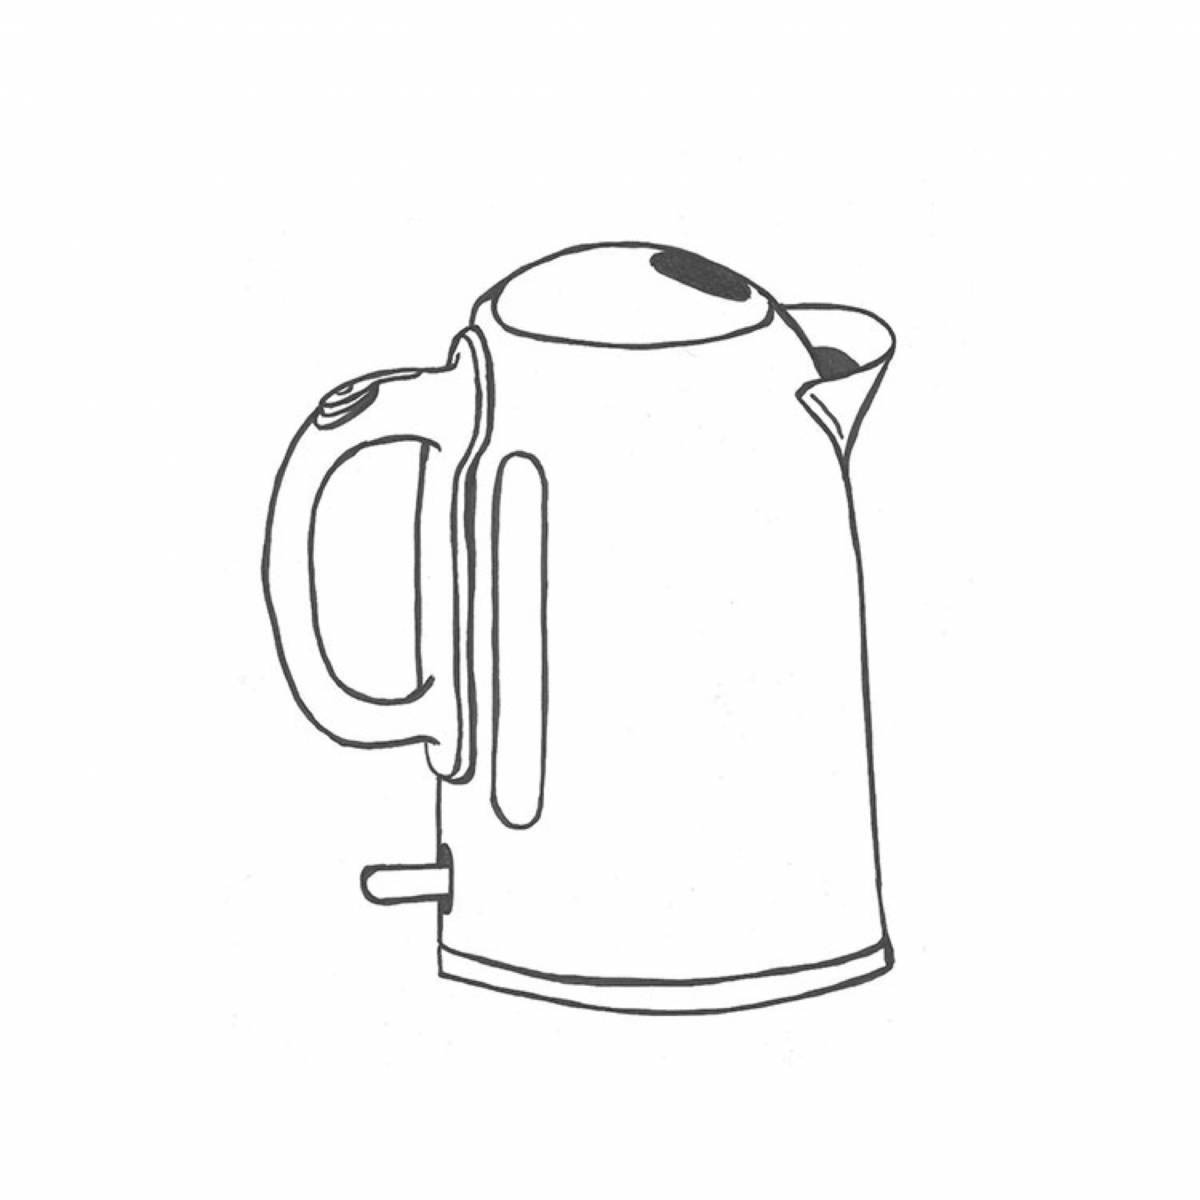 Fancy coloring book with electric kettle for kids